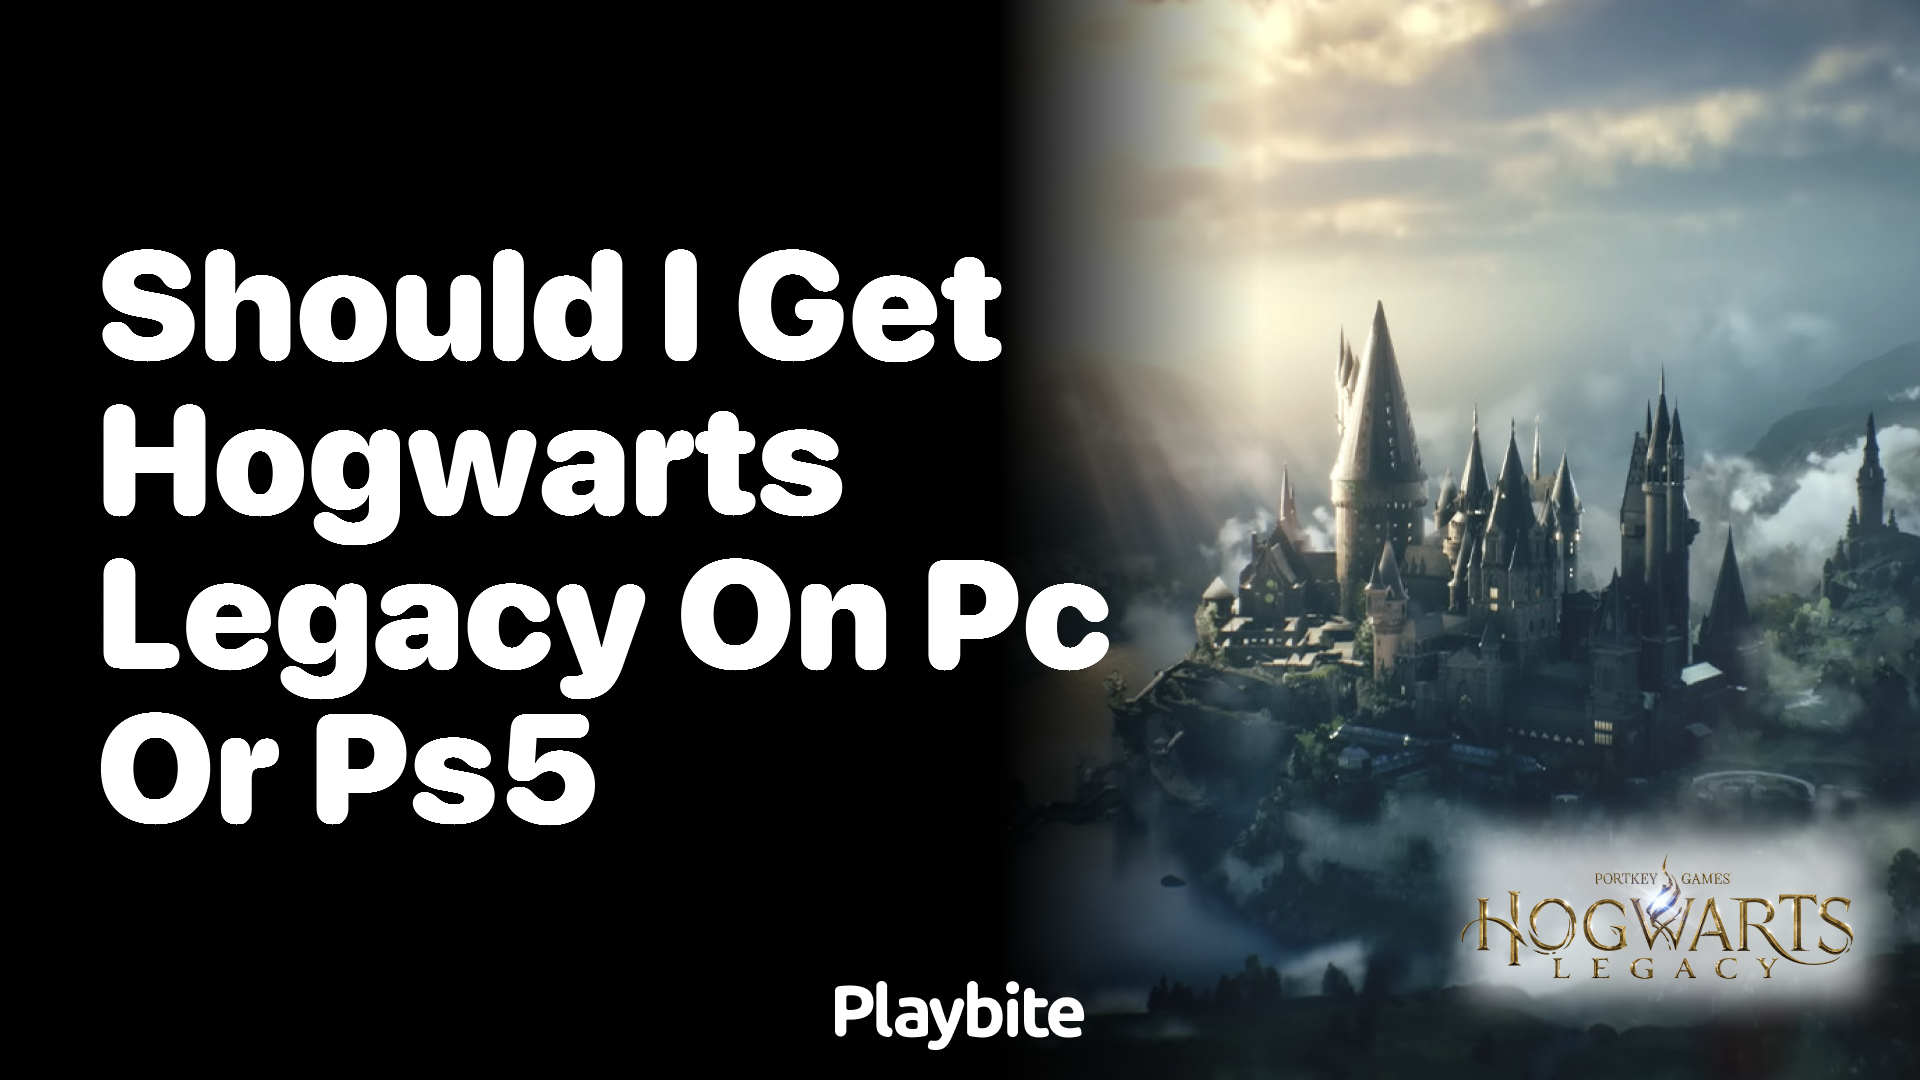 Is it better to get Hogwarts on PC or PS5?